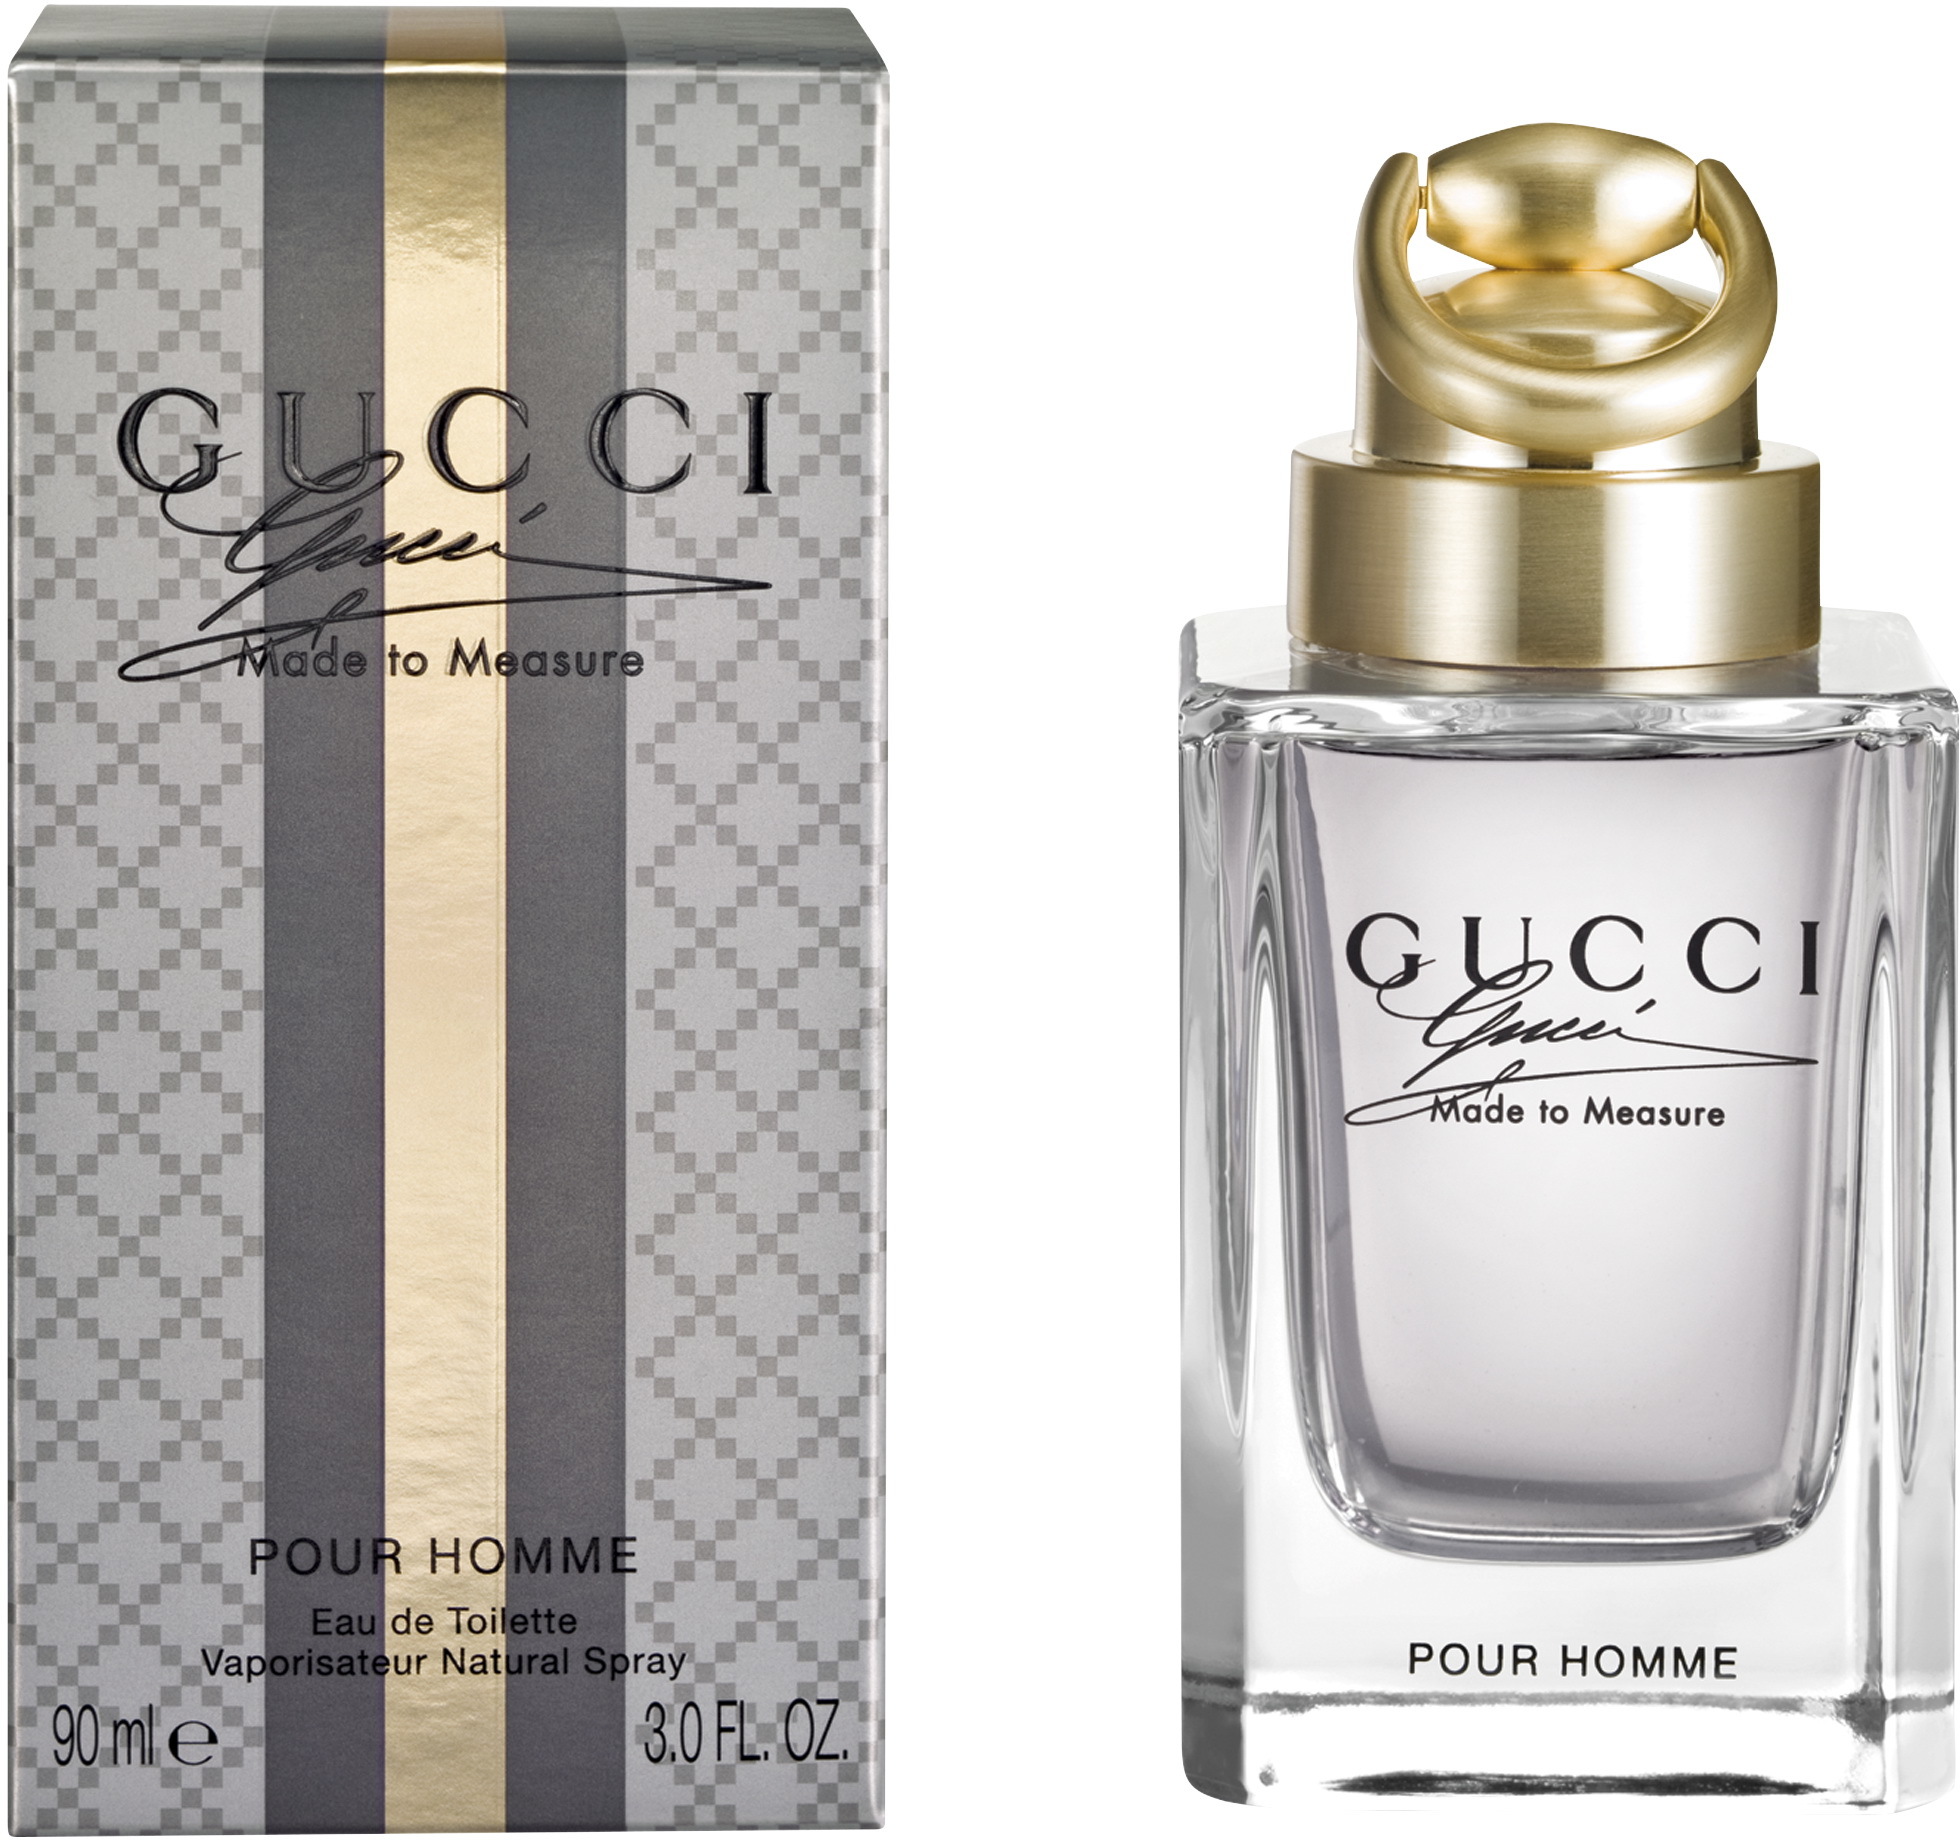 gucci cologne made to measure